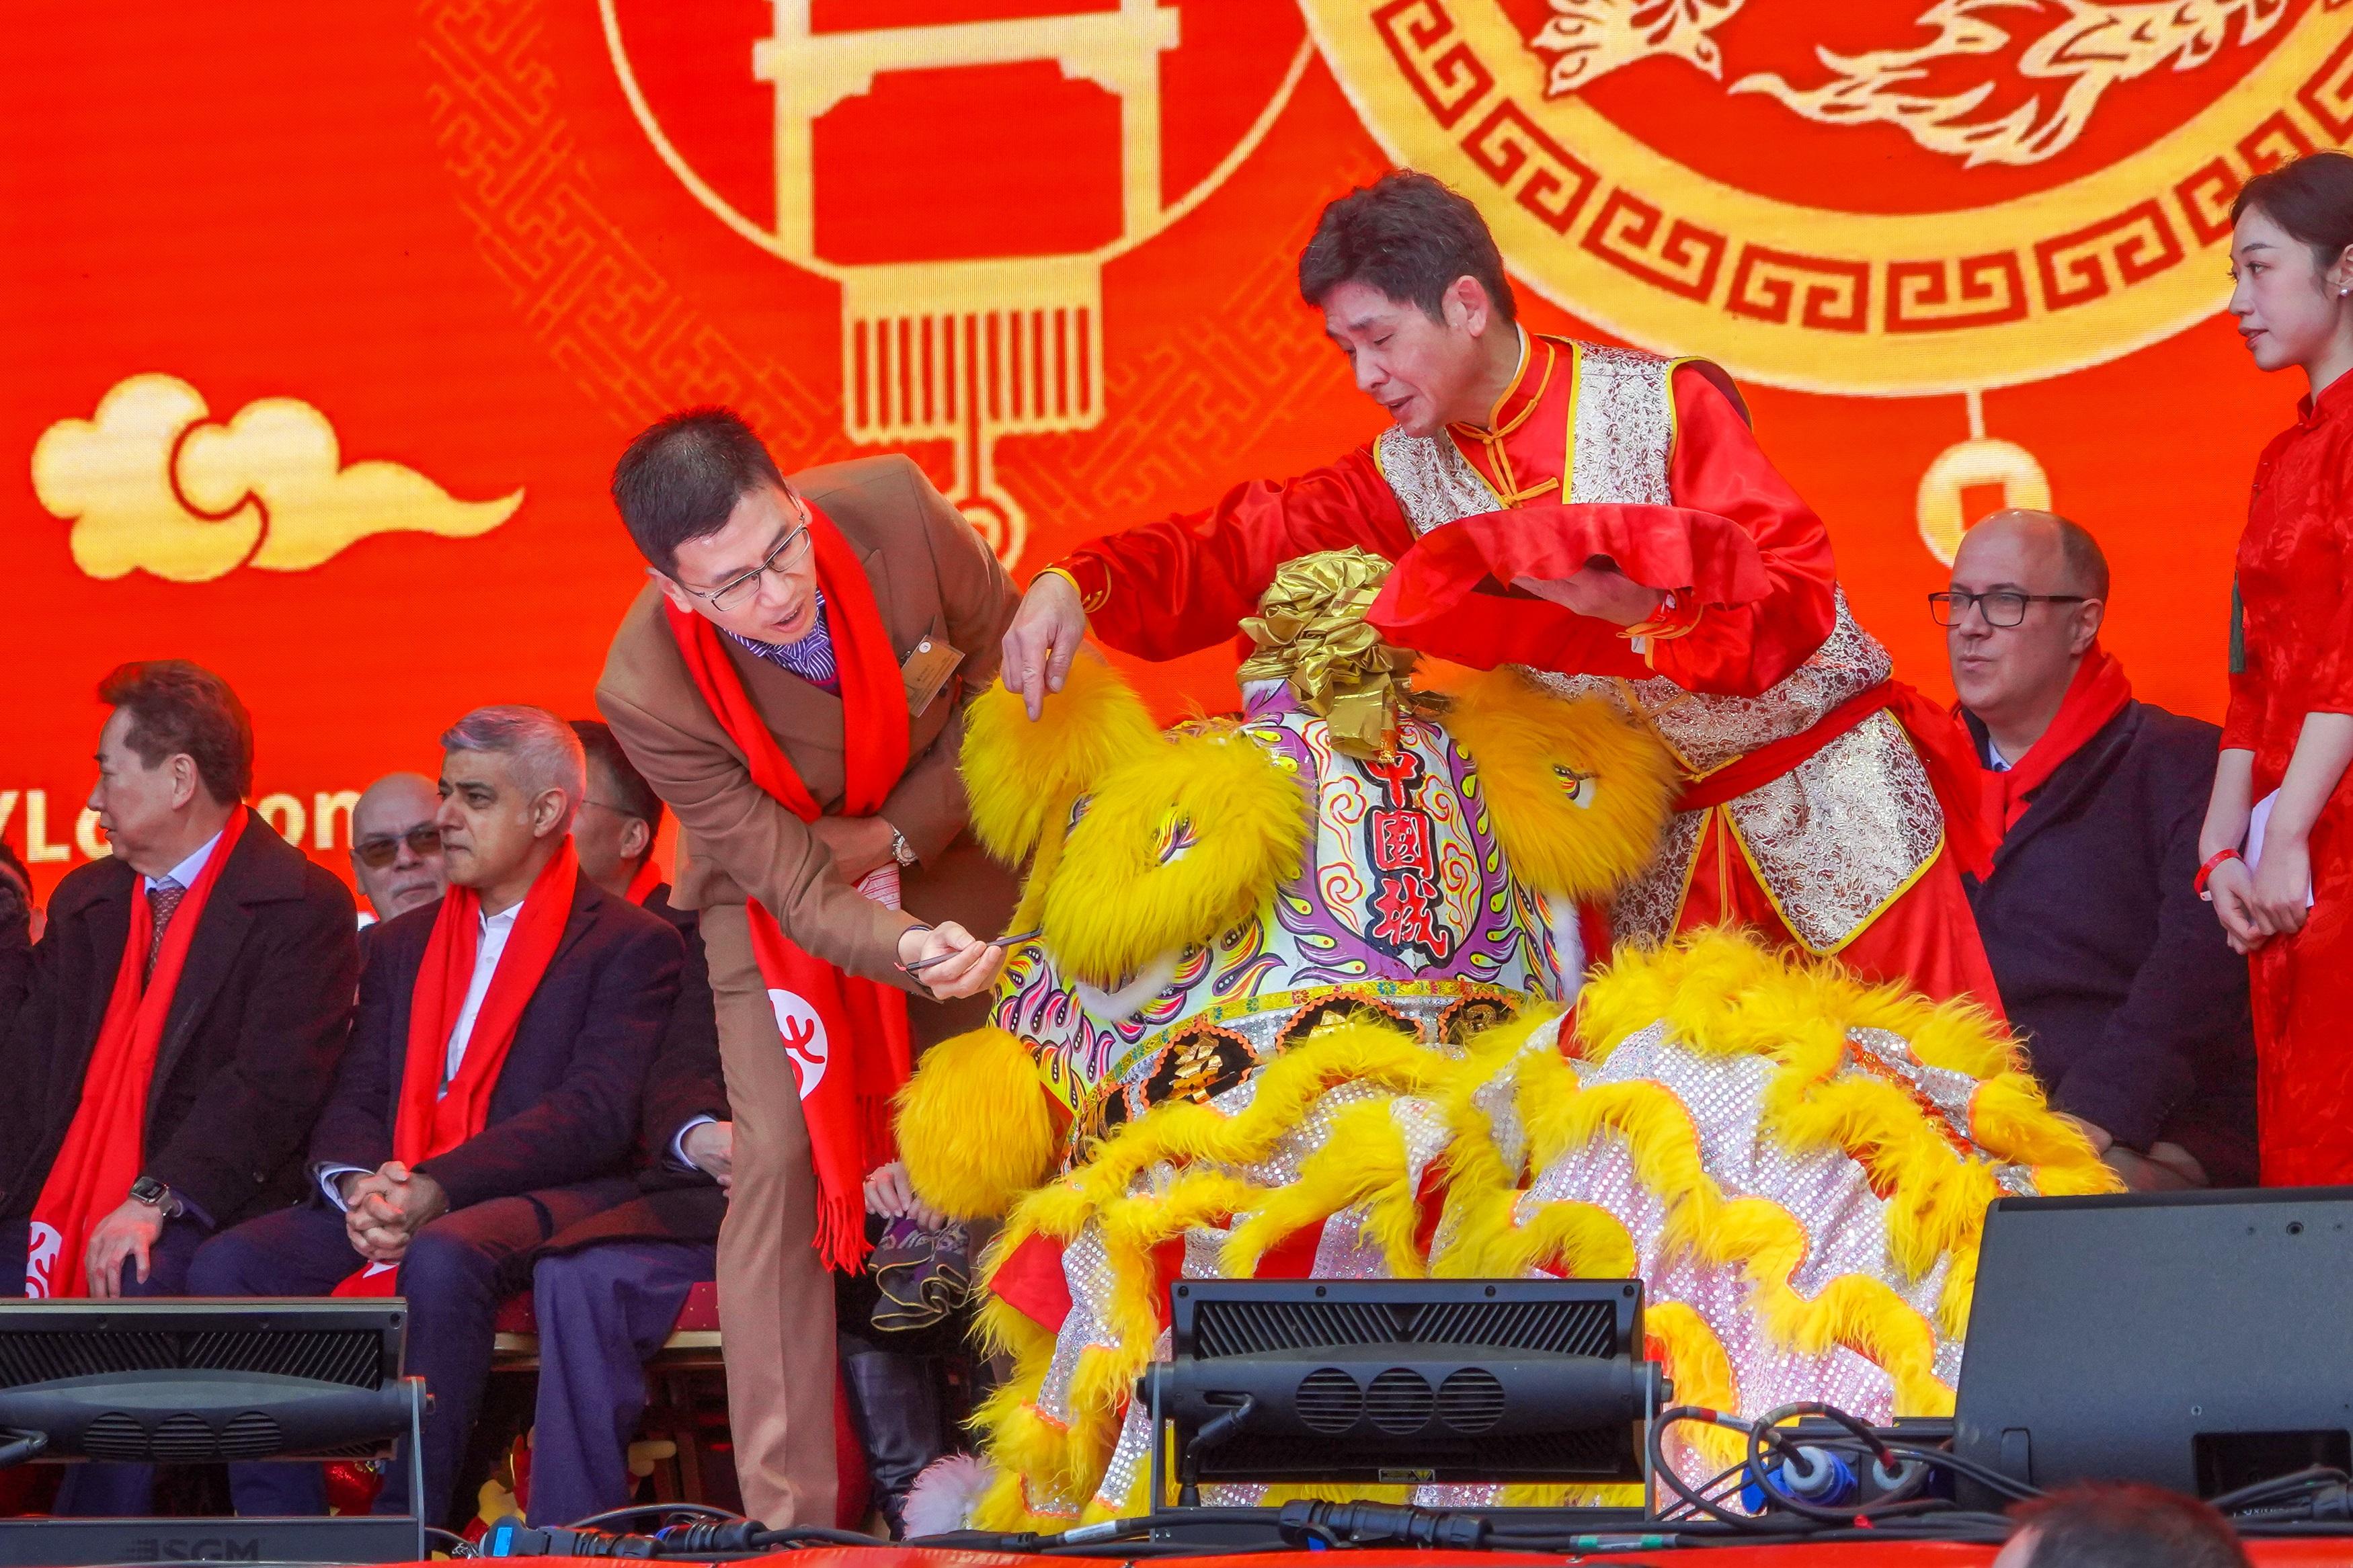 The Hong Kong Economic and Trade Office, London (London ETO) participated in a large-scale London Chinatown celebration in Trafalgar Square, Chinatown and Charing Cross Road on February 11 (London time). Photo shows the Director-General of the London ETO, Mr Gilford Law, taking part in the eye-dotting ceremony for the lion dance performance. 